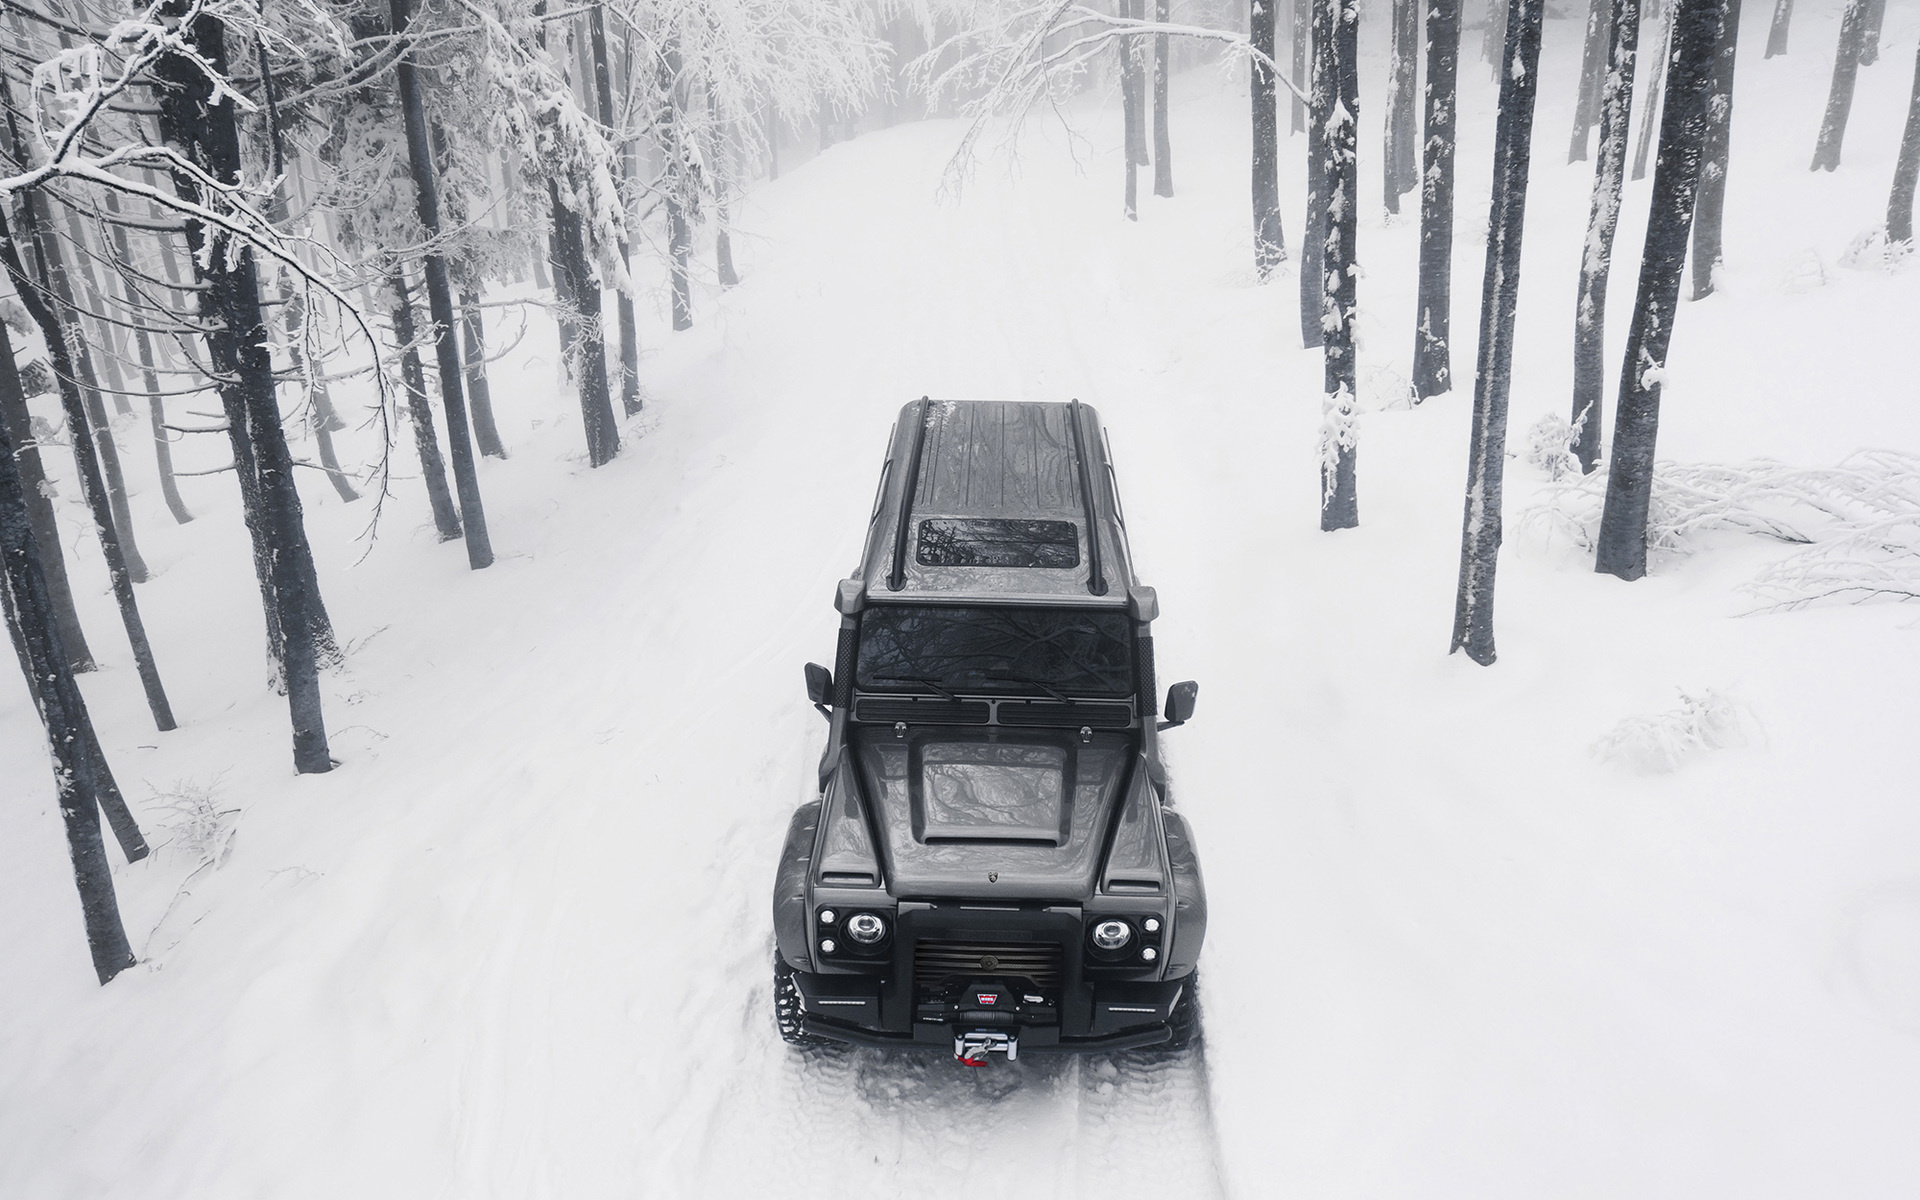 Land Rover Defender forest offroad, Ares design tuning, Winter SUVs, High-quality wallpapers, 1920x1200 HD Desktop